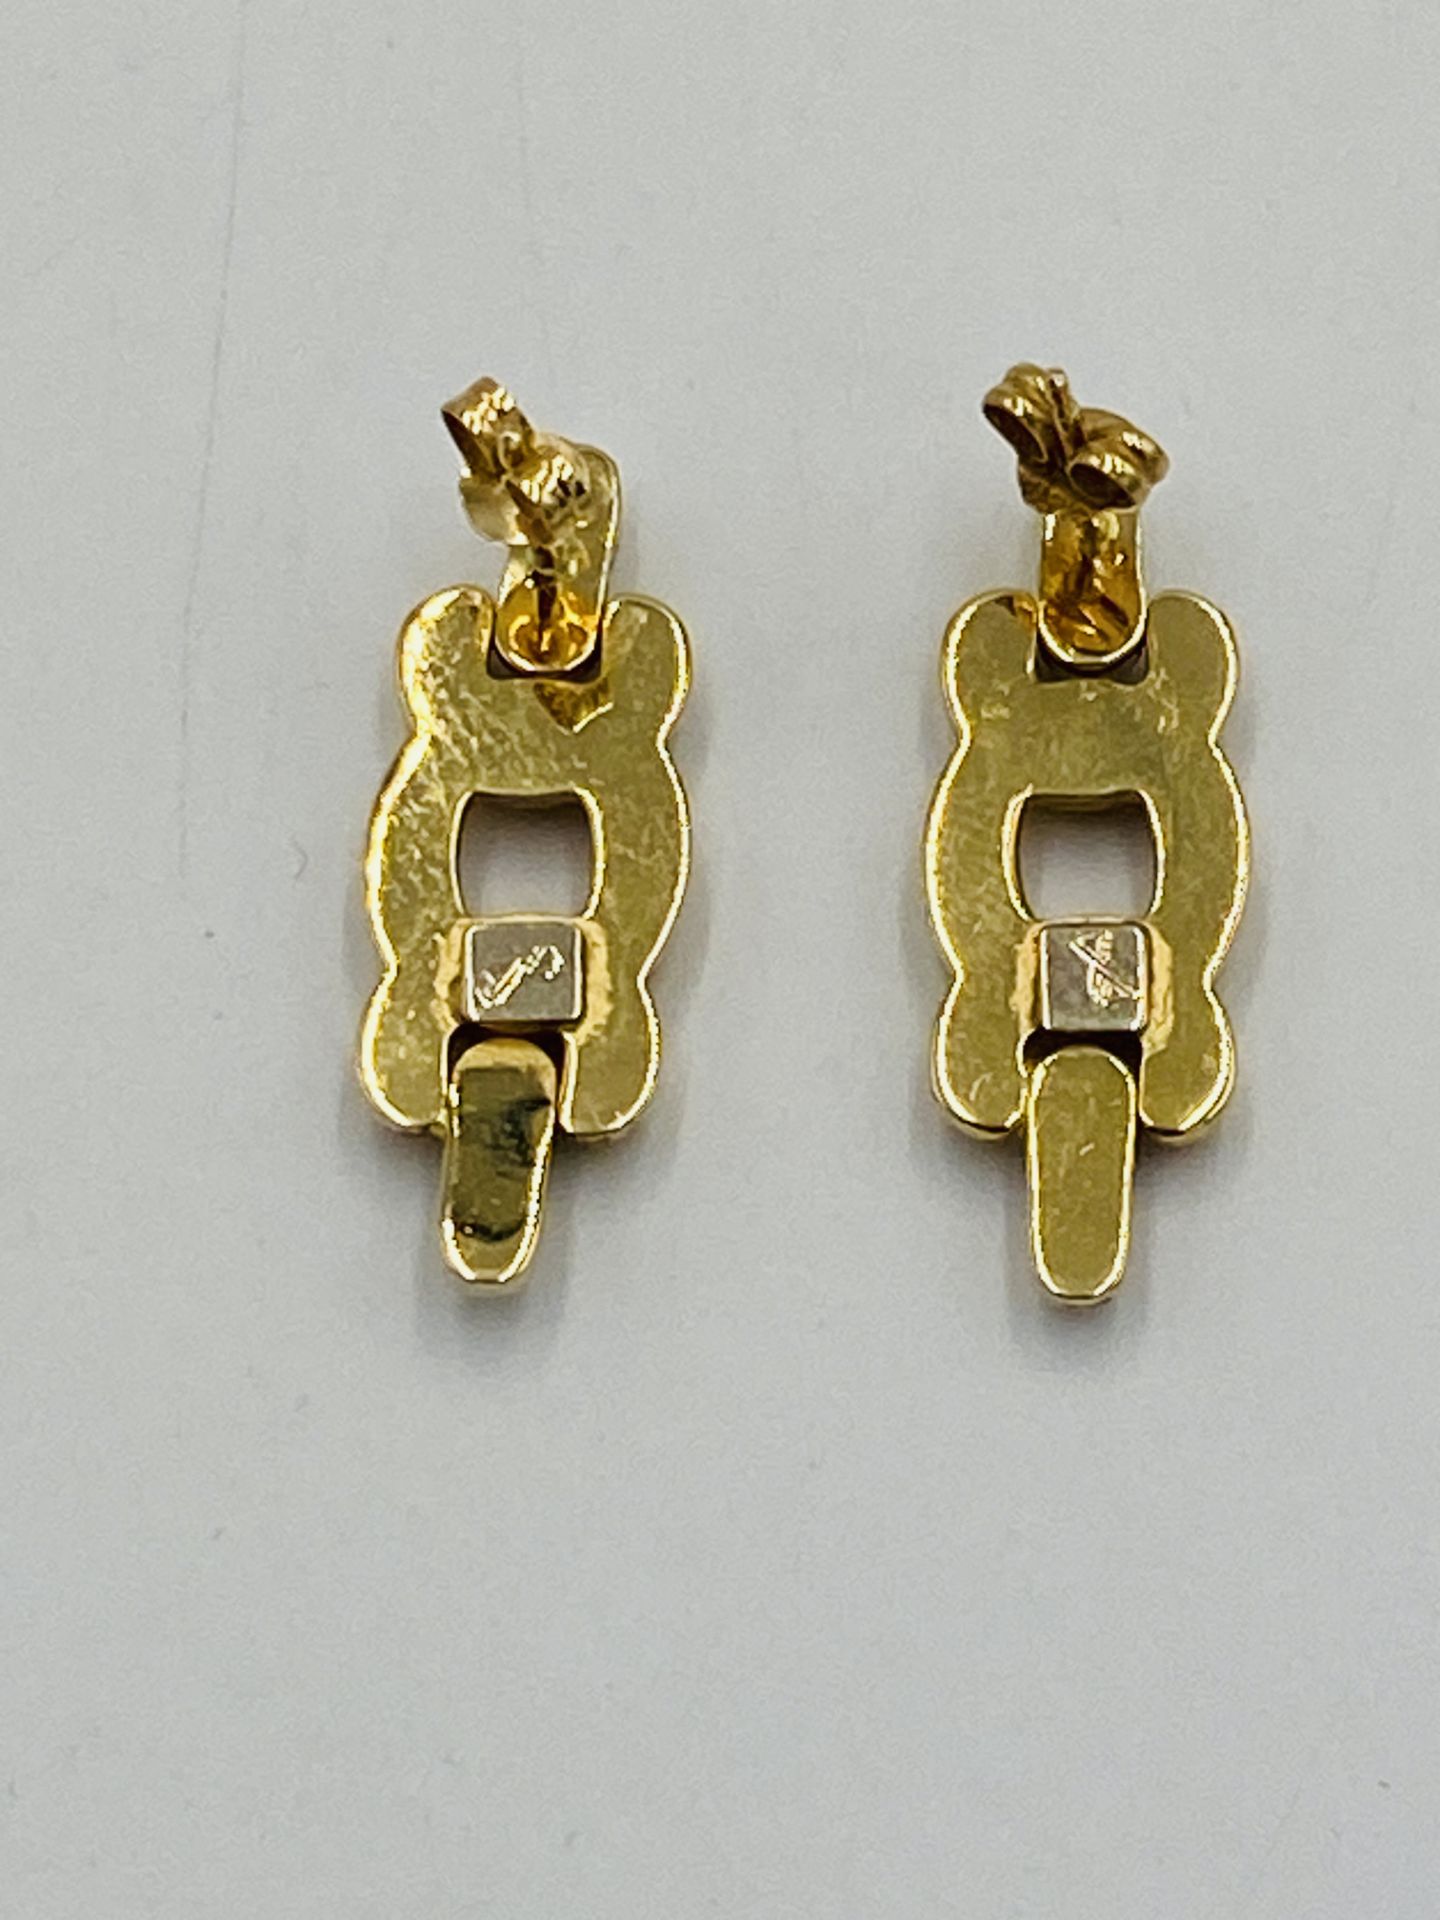 Pair of 18ct gold earrings - Image 2 of 3